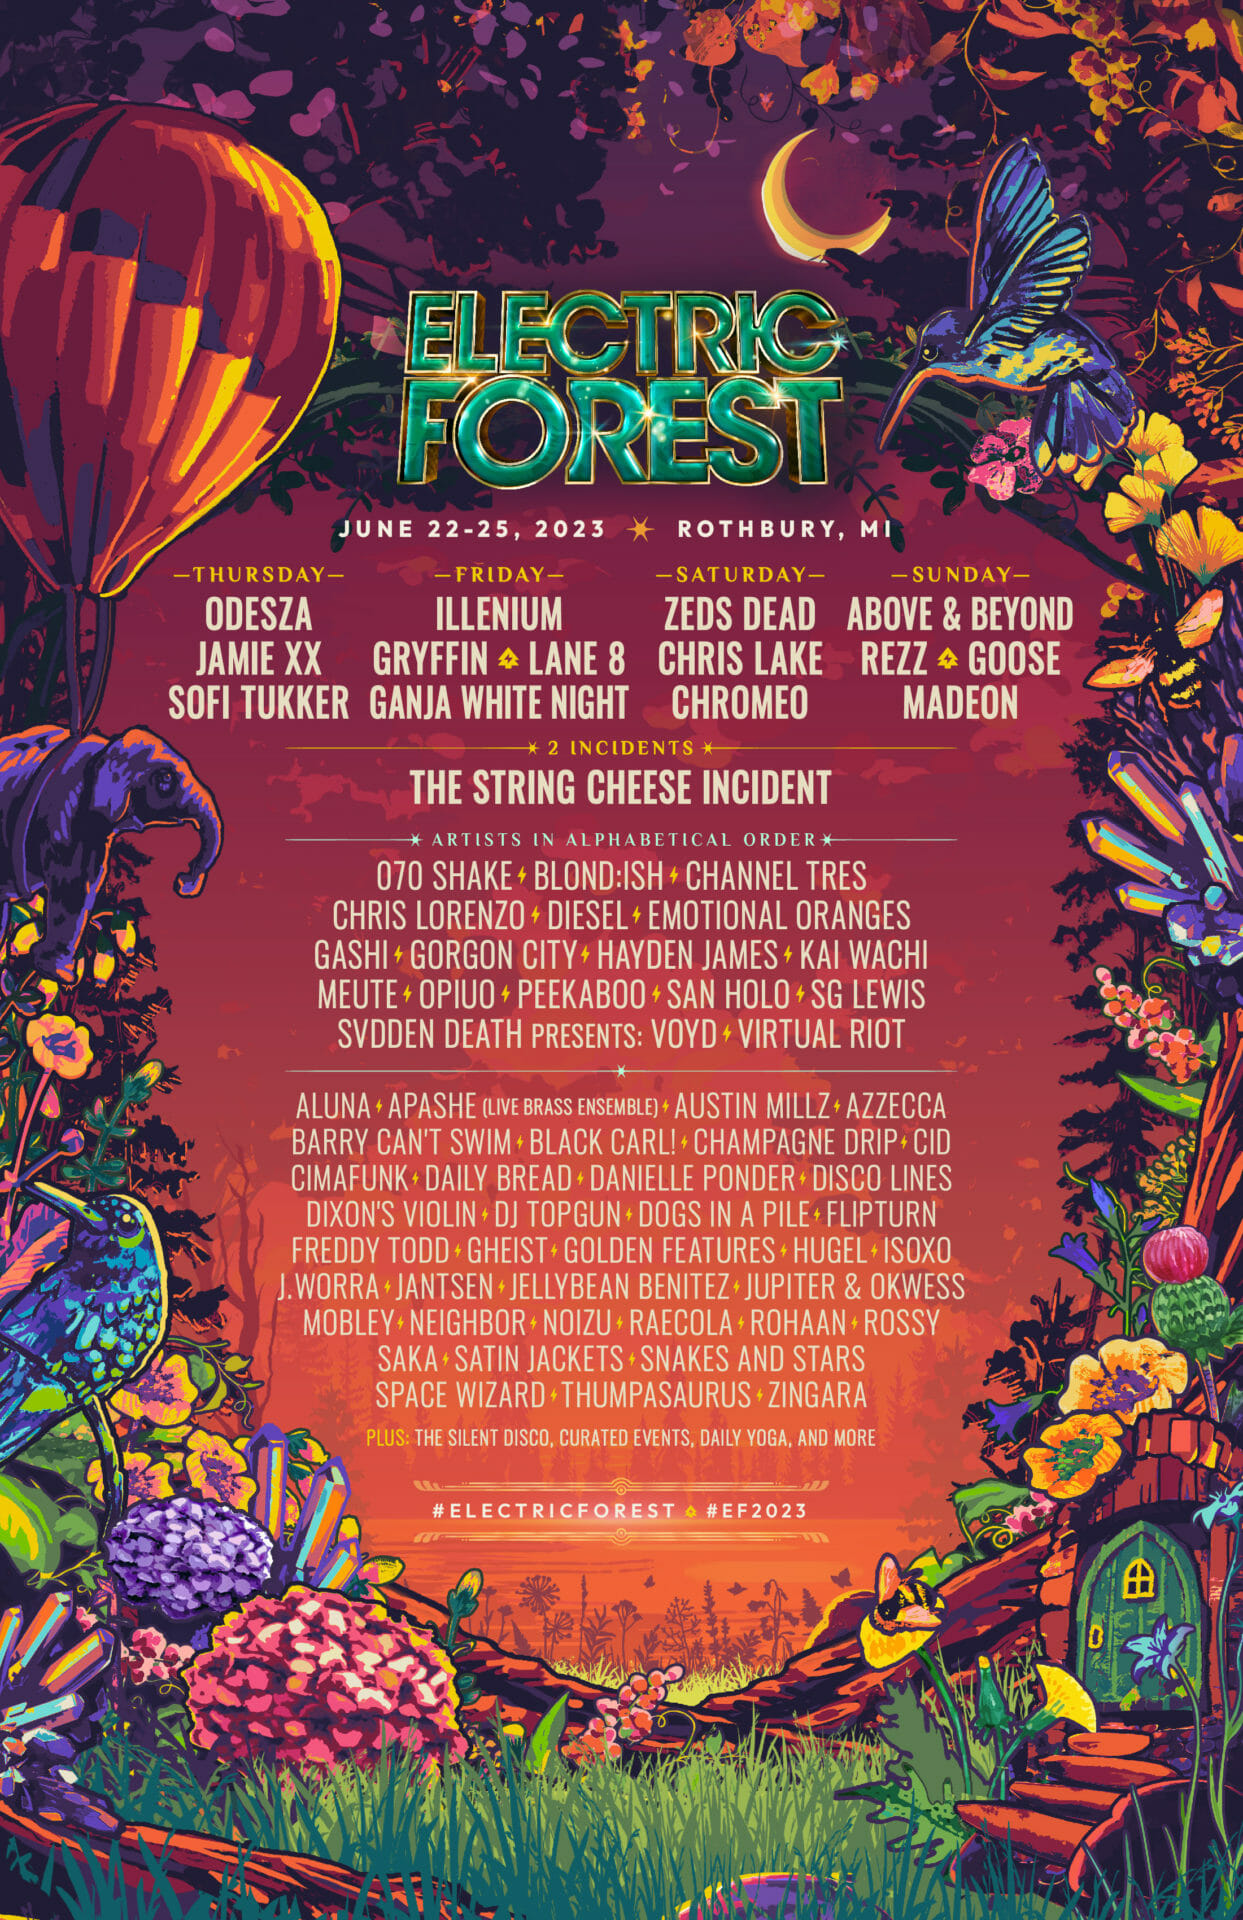 Electric Forest Announces 2023 Initial Artist Lineup The String Cheese Incident, Goose, REZZ